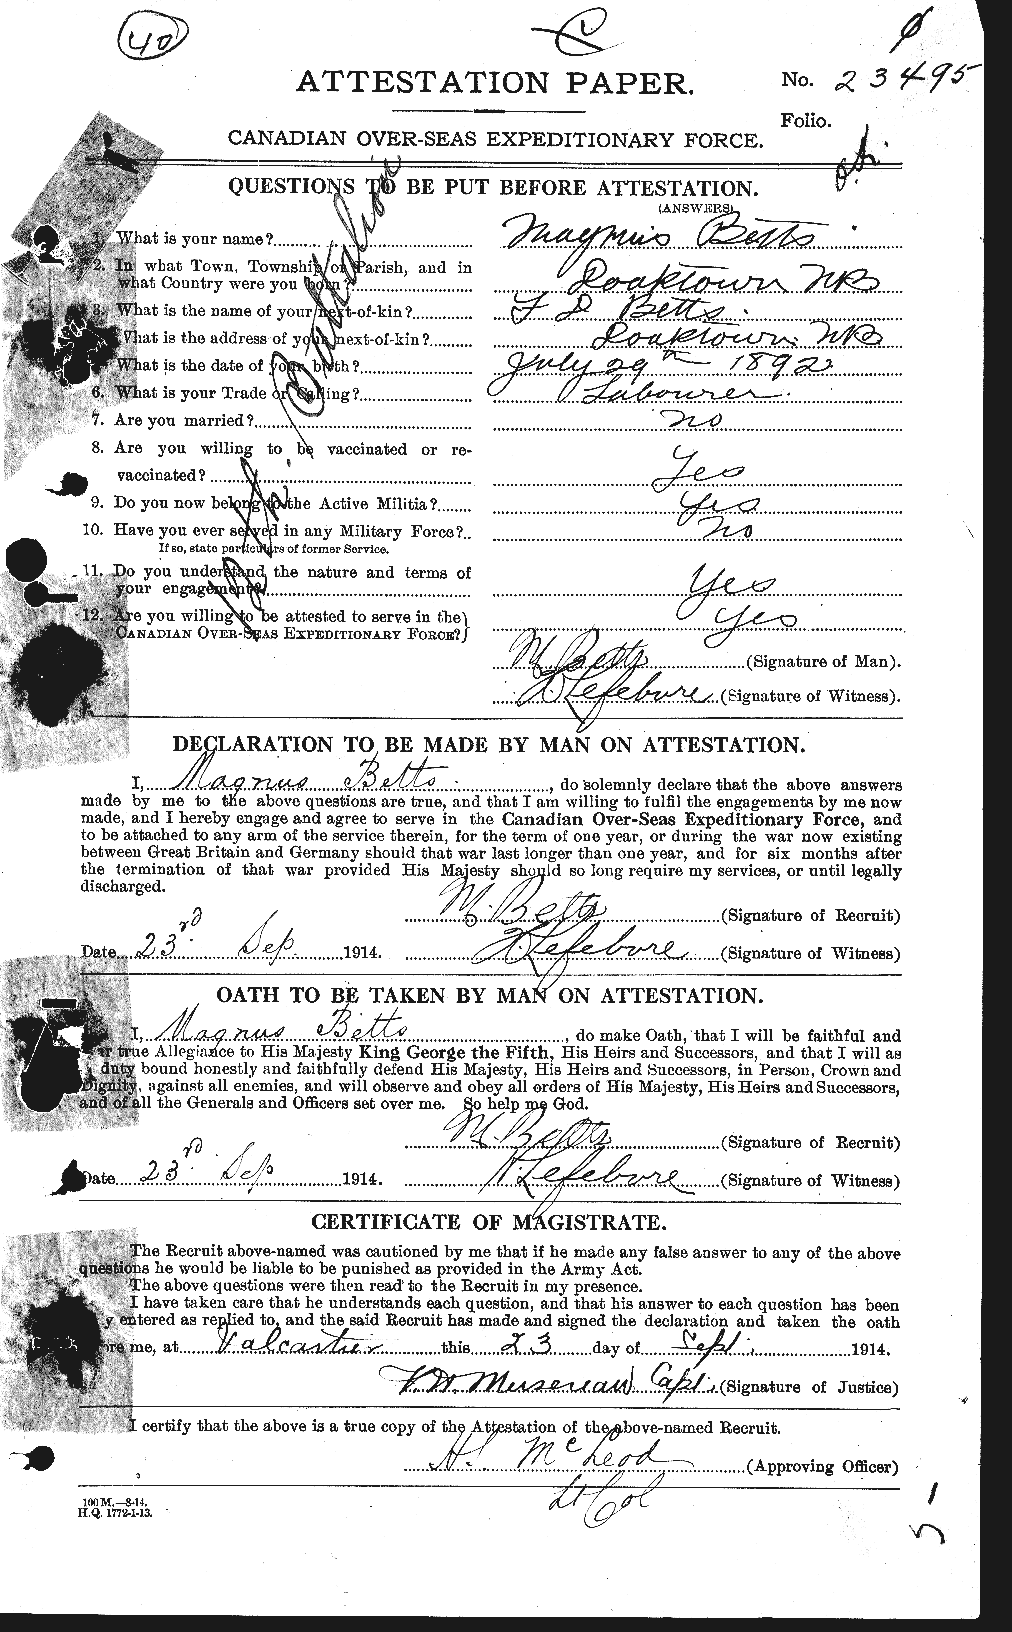 Personnel Records of the First World War - CEF 237182a